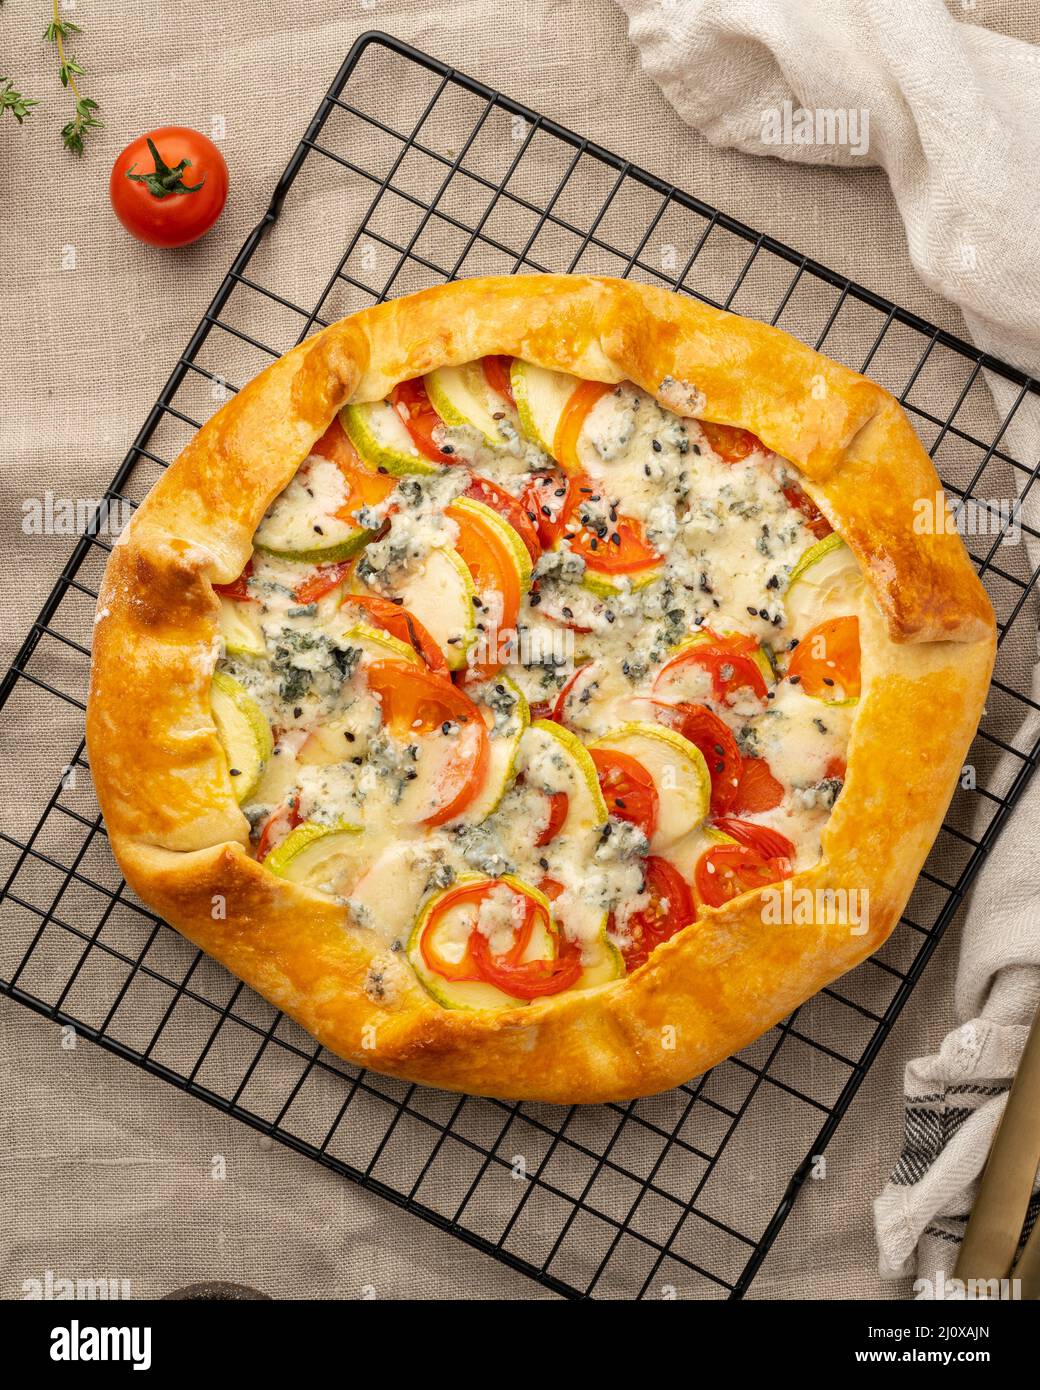 Homemade savory galette with vegetables, wheat pie with tomatoes, zucchini, vertical Stock Photo